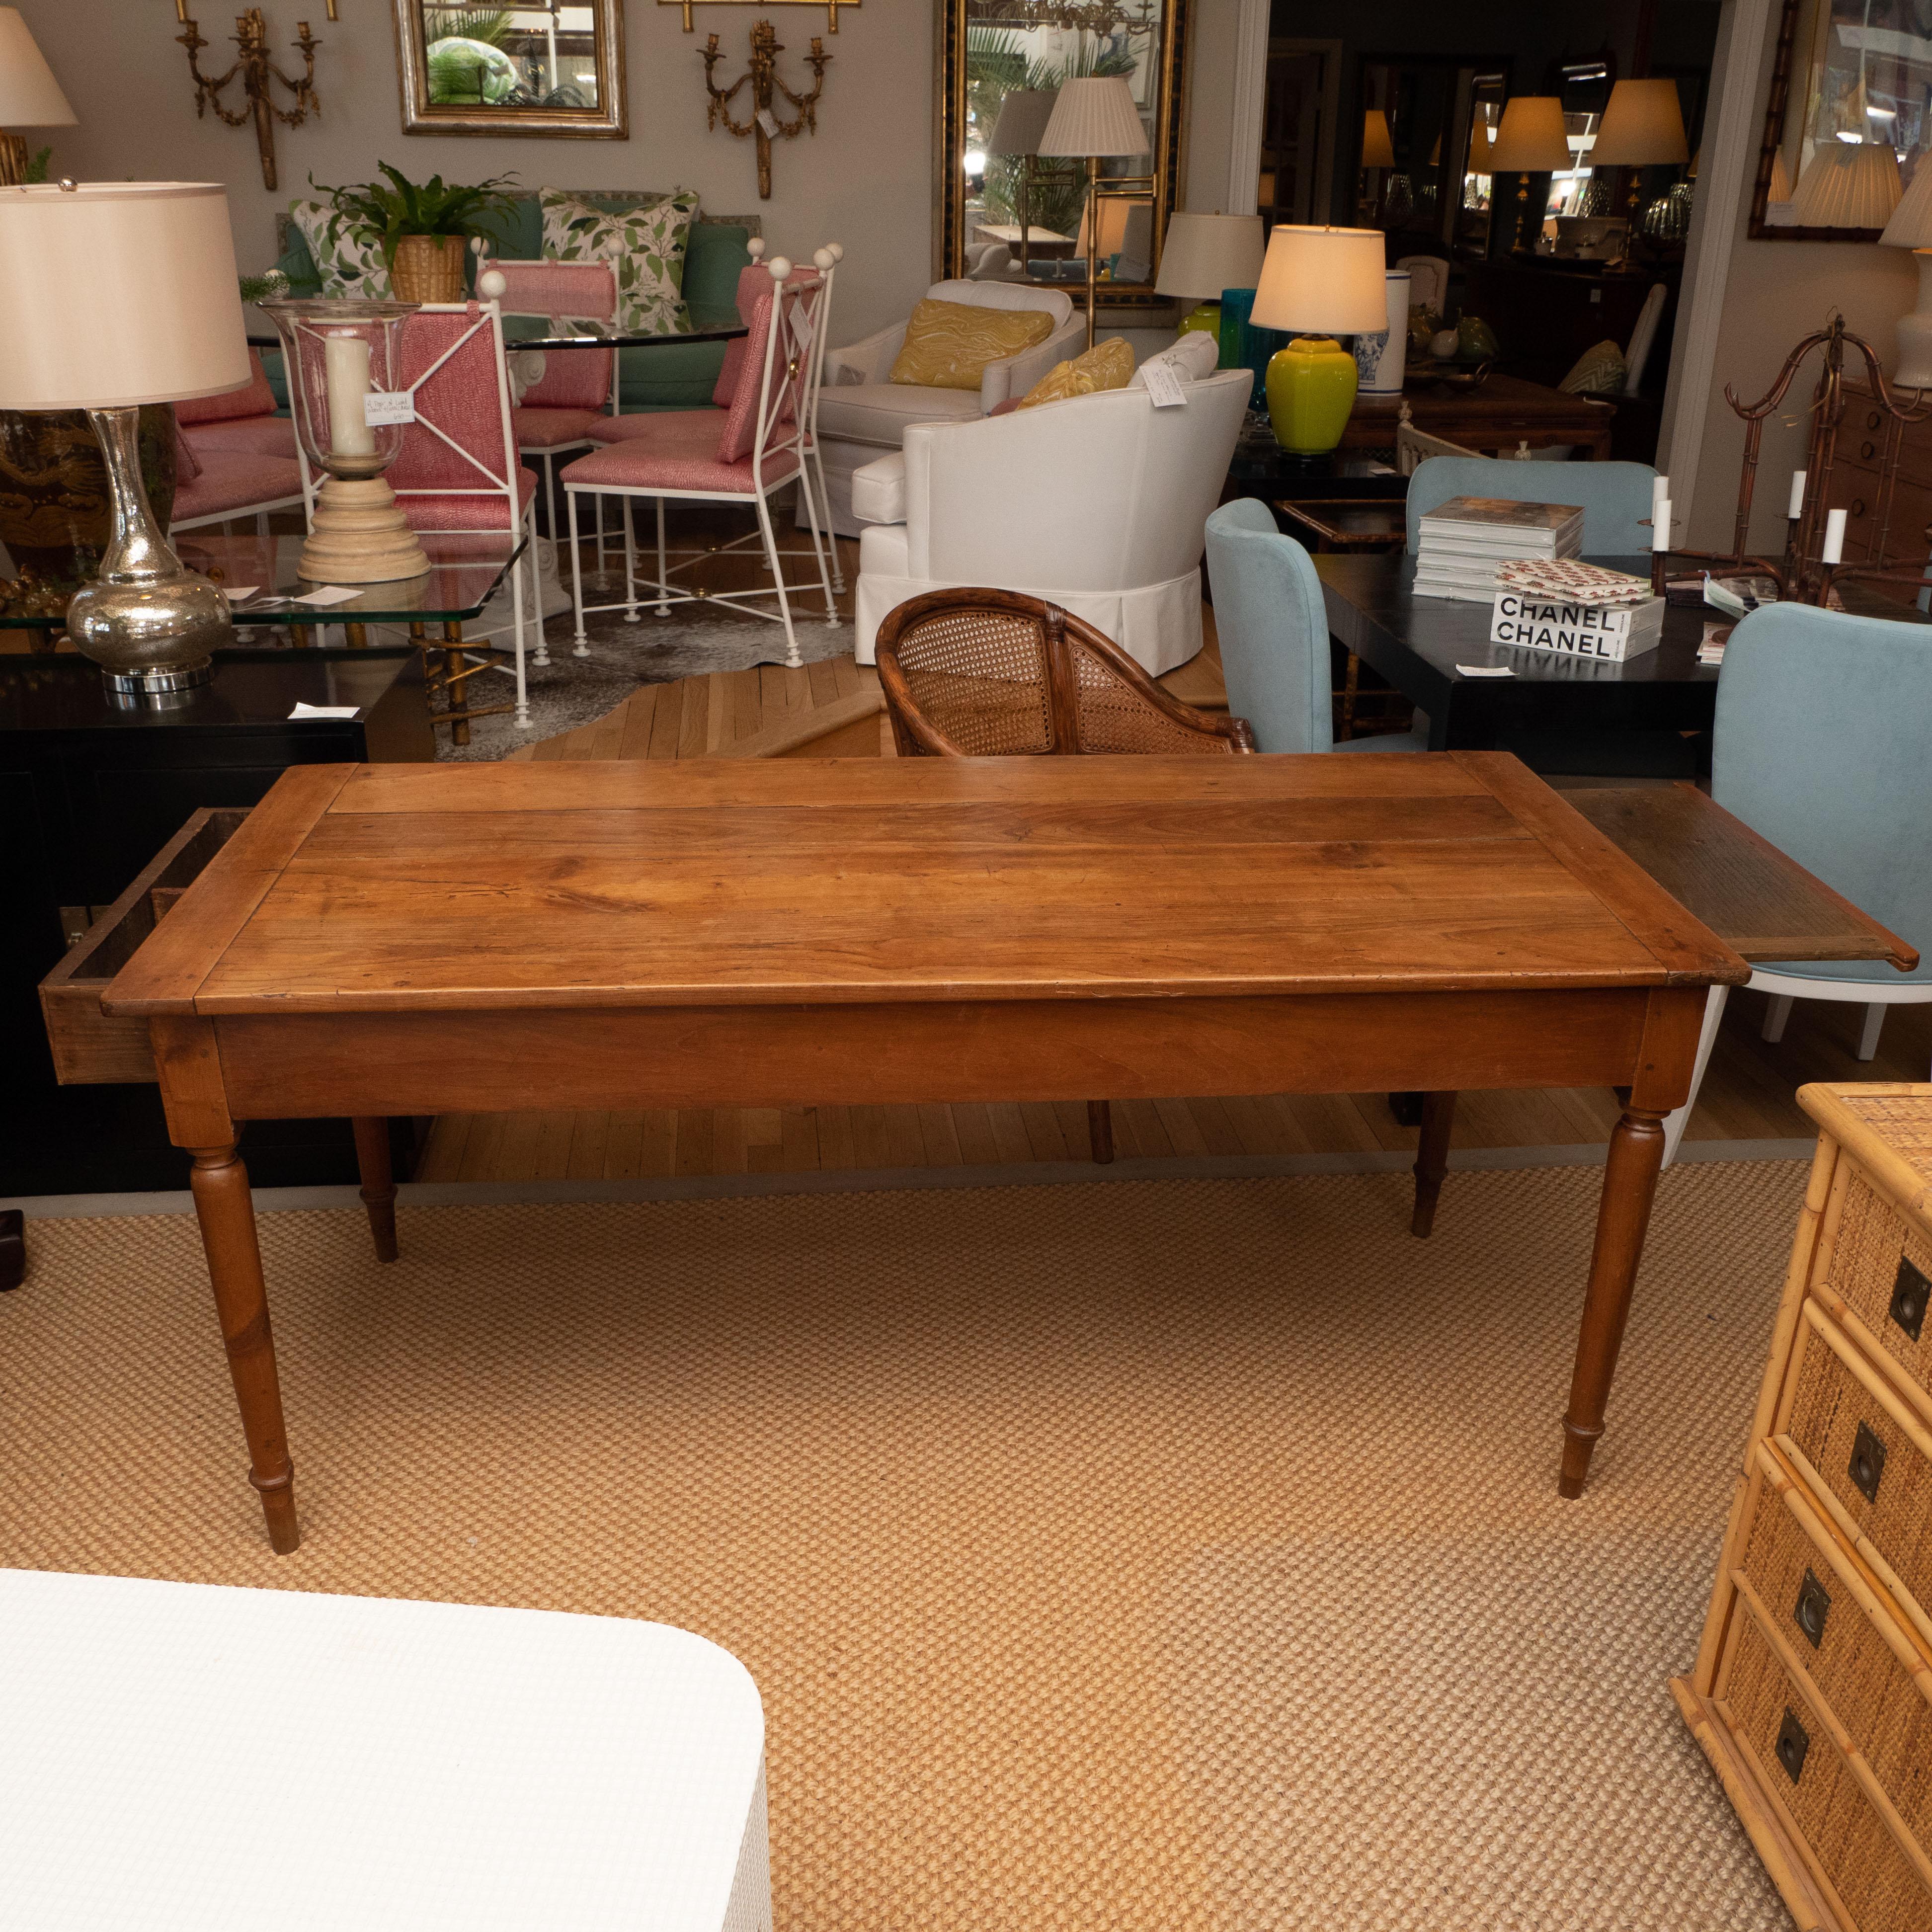 A nice looking farm table in cherry with tapered legs, featuring a drawer on one end and a pull-out tray on the other end. The table has worn to a lovely warm patina and Its clean lines make it suitable for both traditional and contemporary settings.